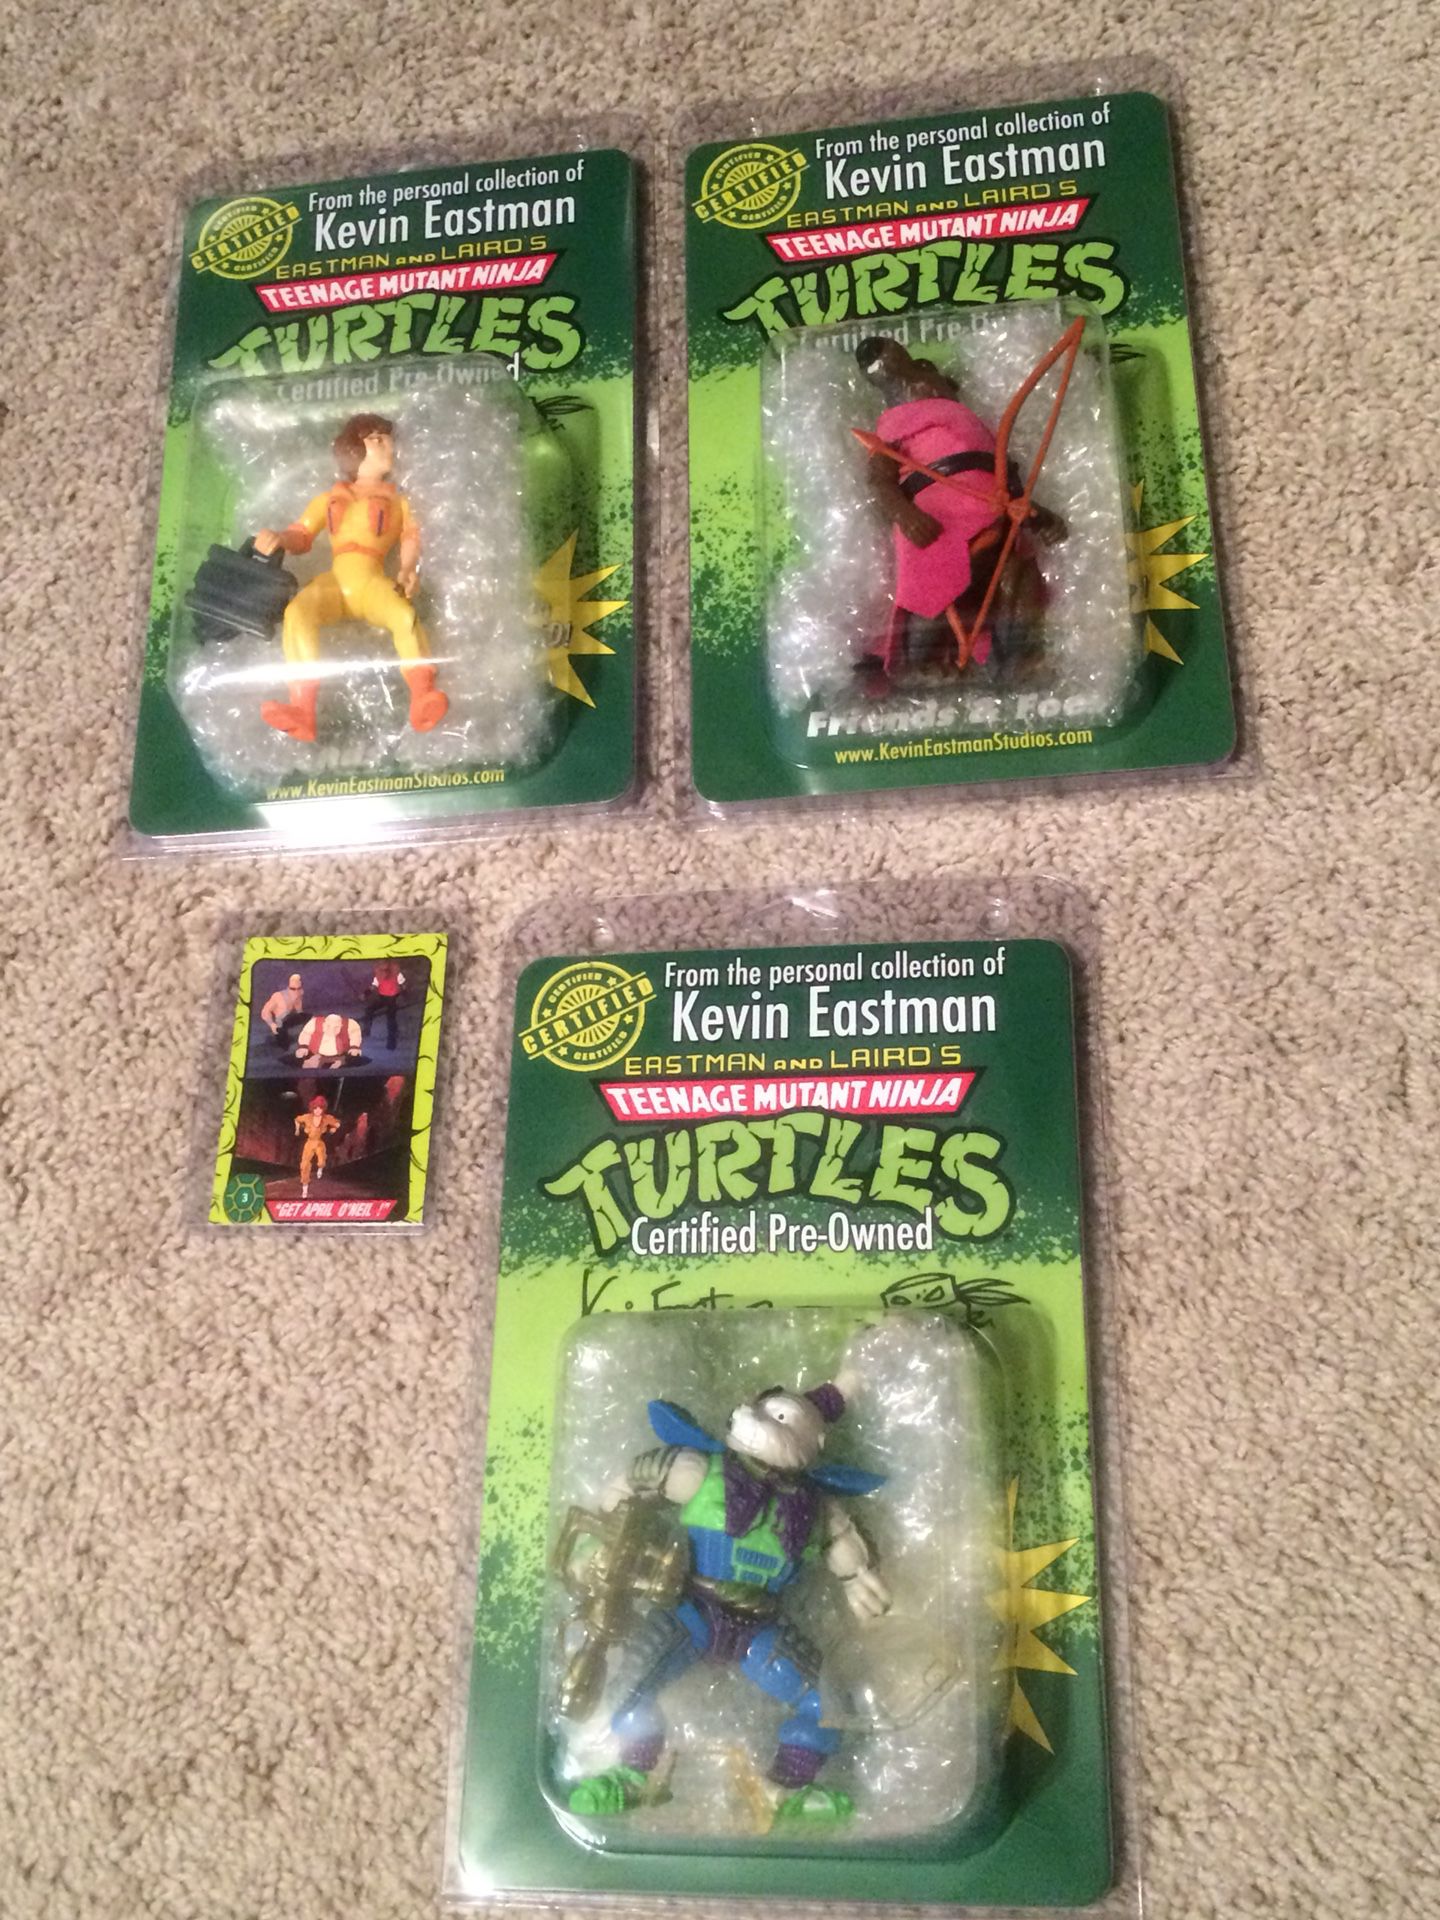 SIGNED TMNT Ninja Turtles Figures From Kevin Eastman’s Collection SHIPPING ONLY